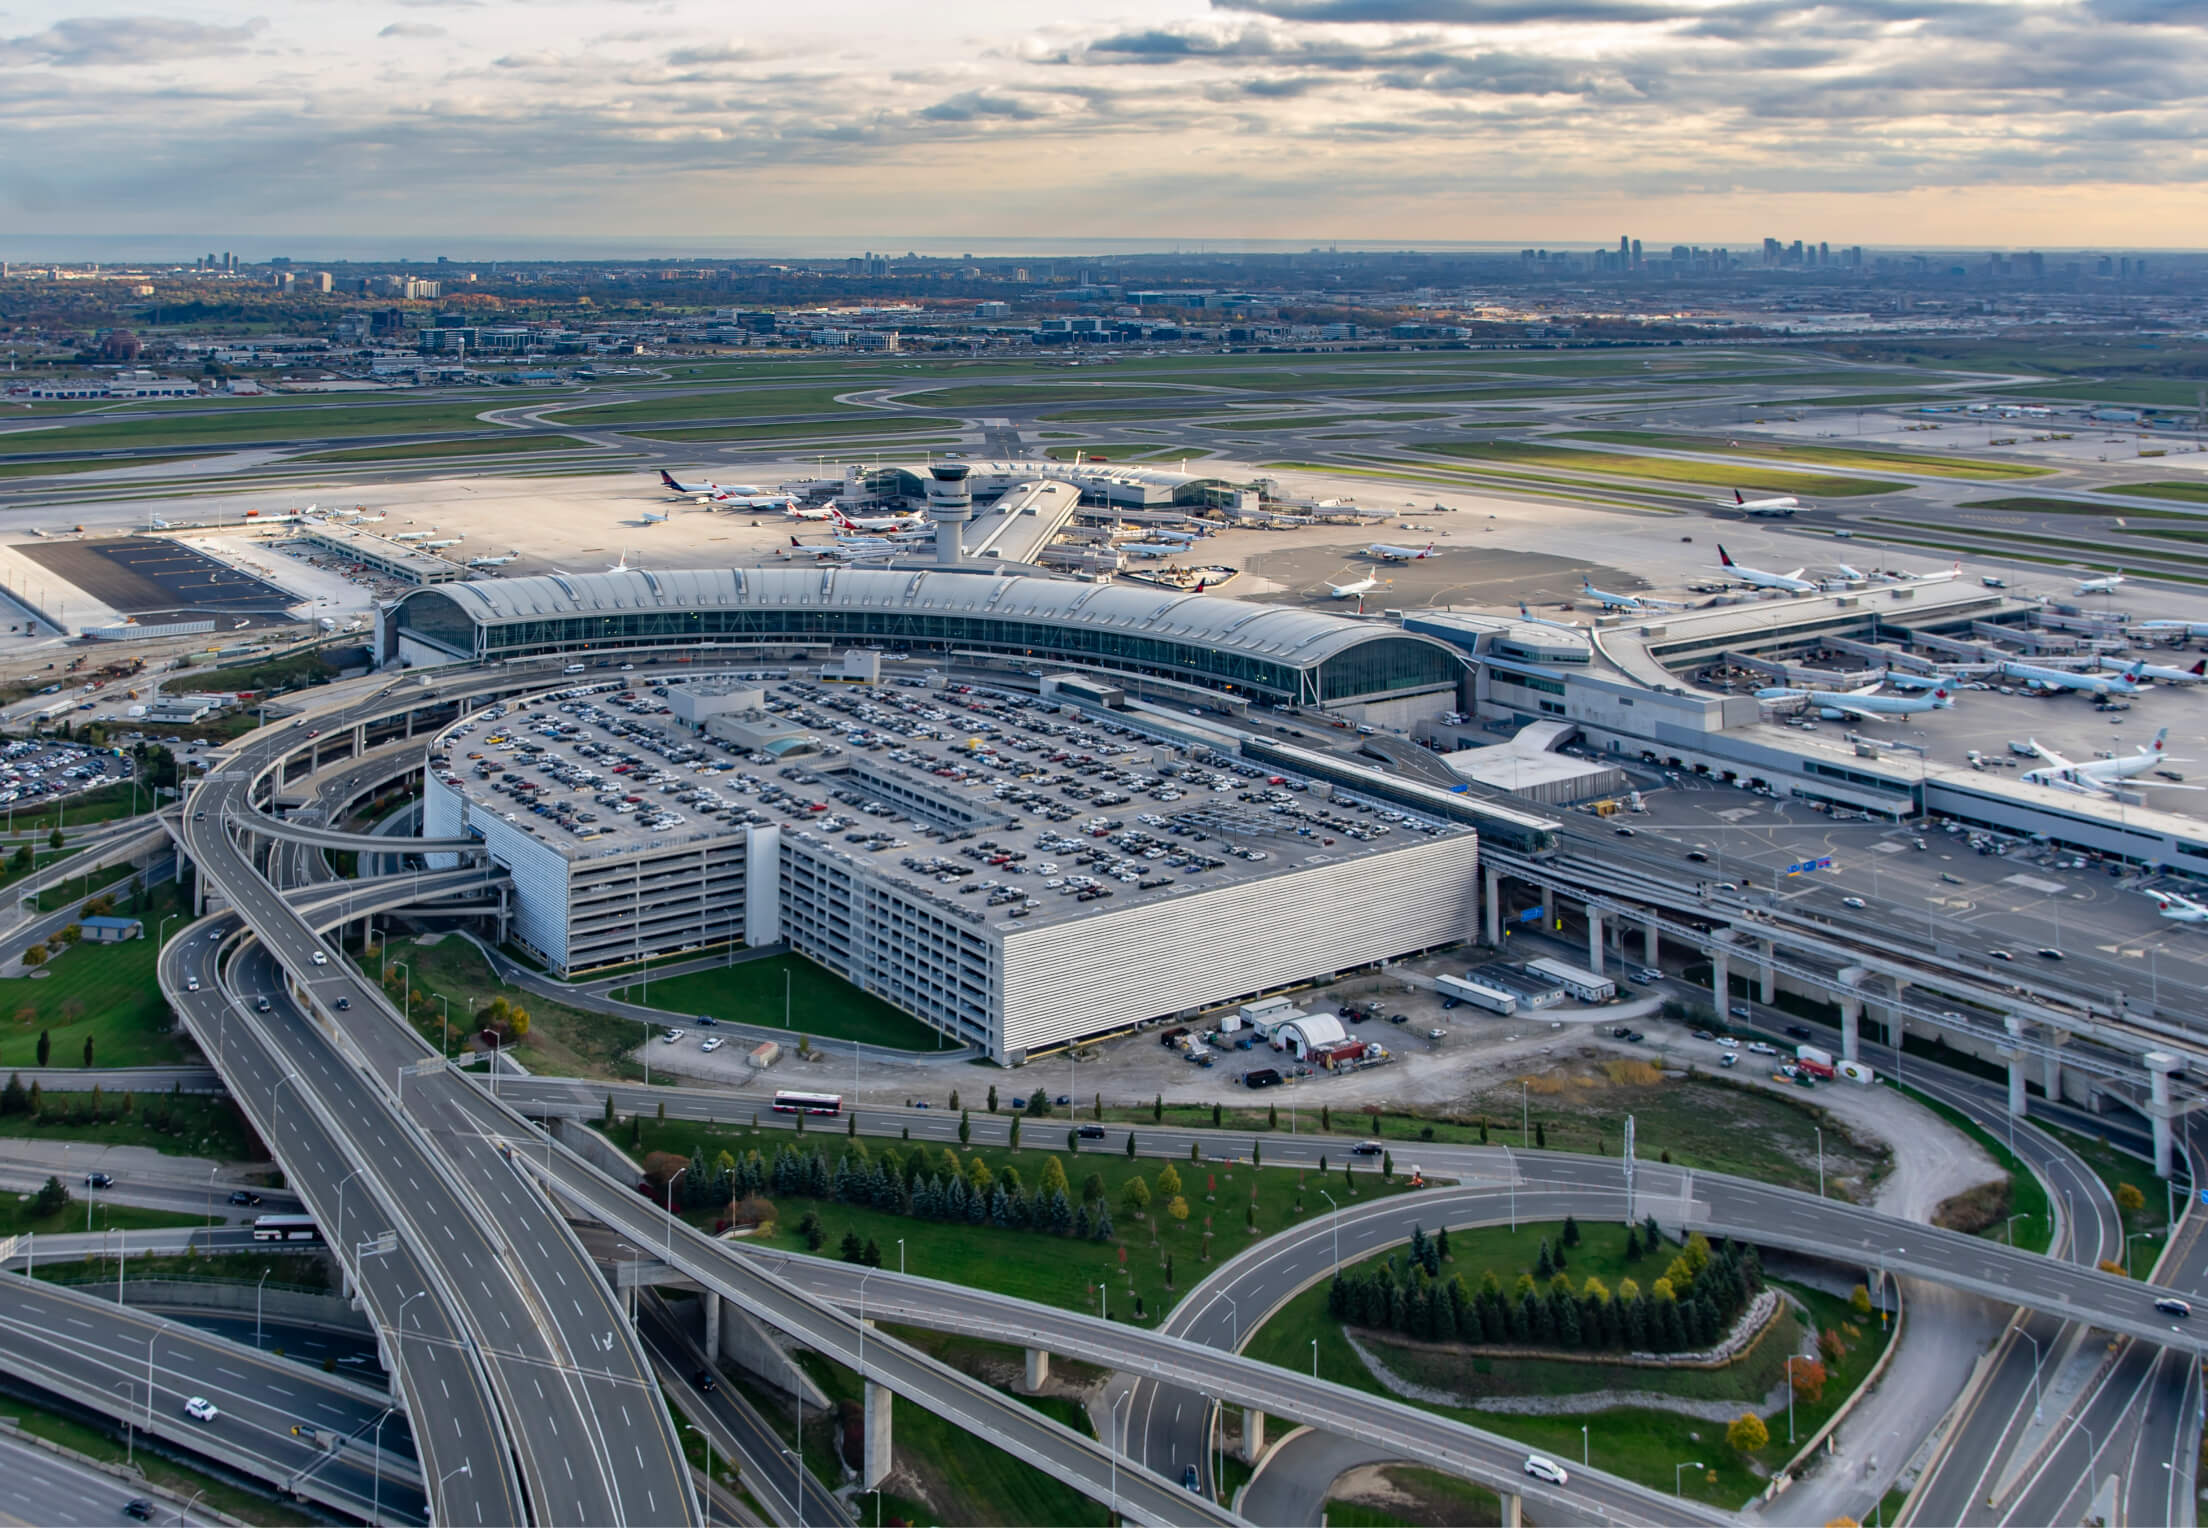 An aerial view of the entire Toronto Pearson Airport